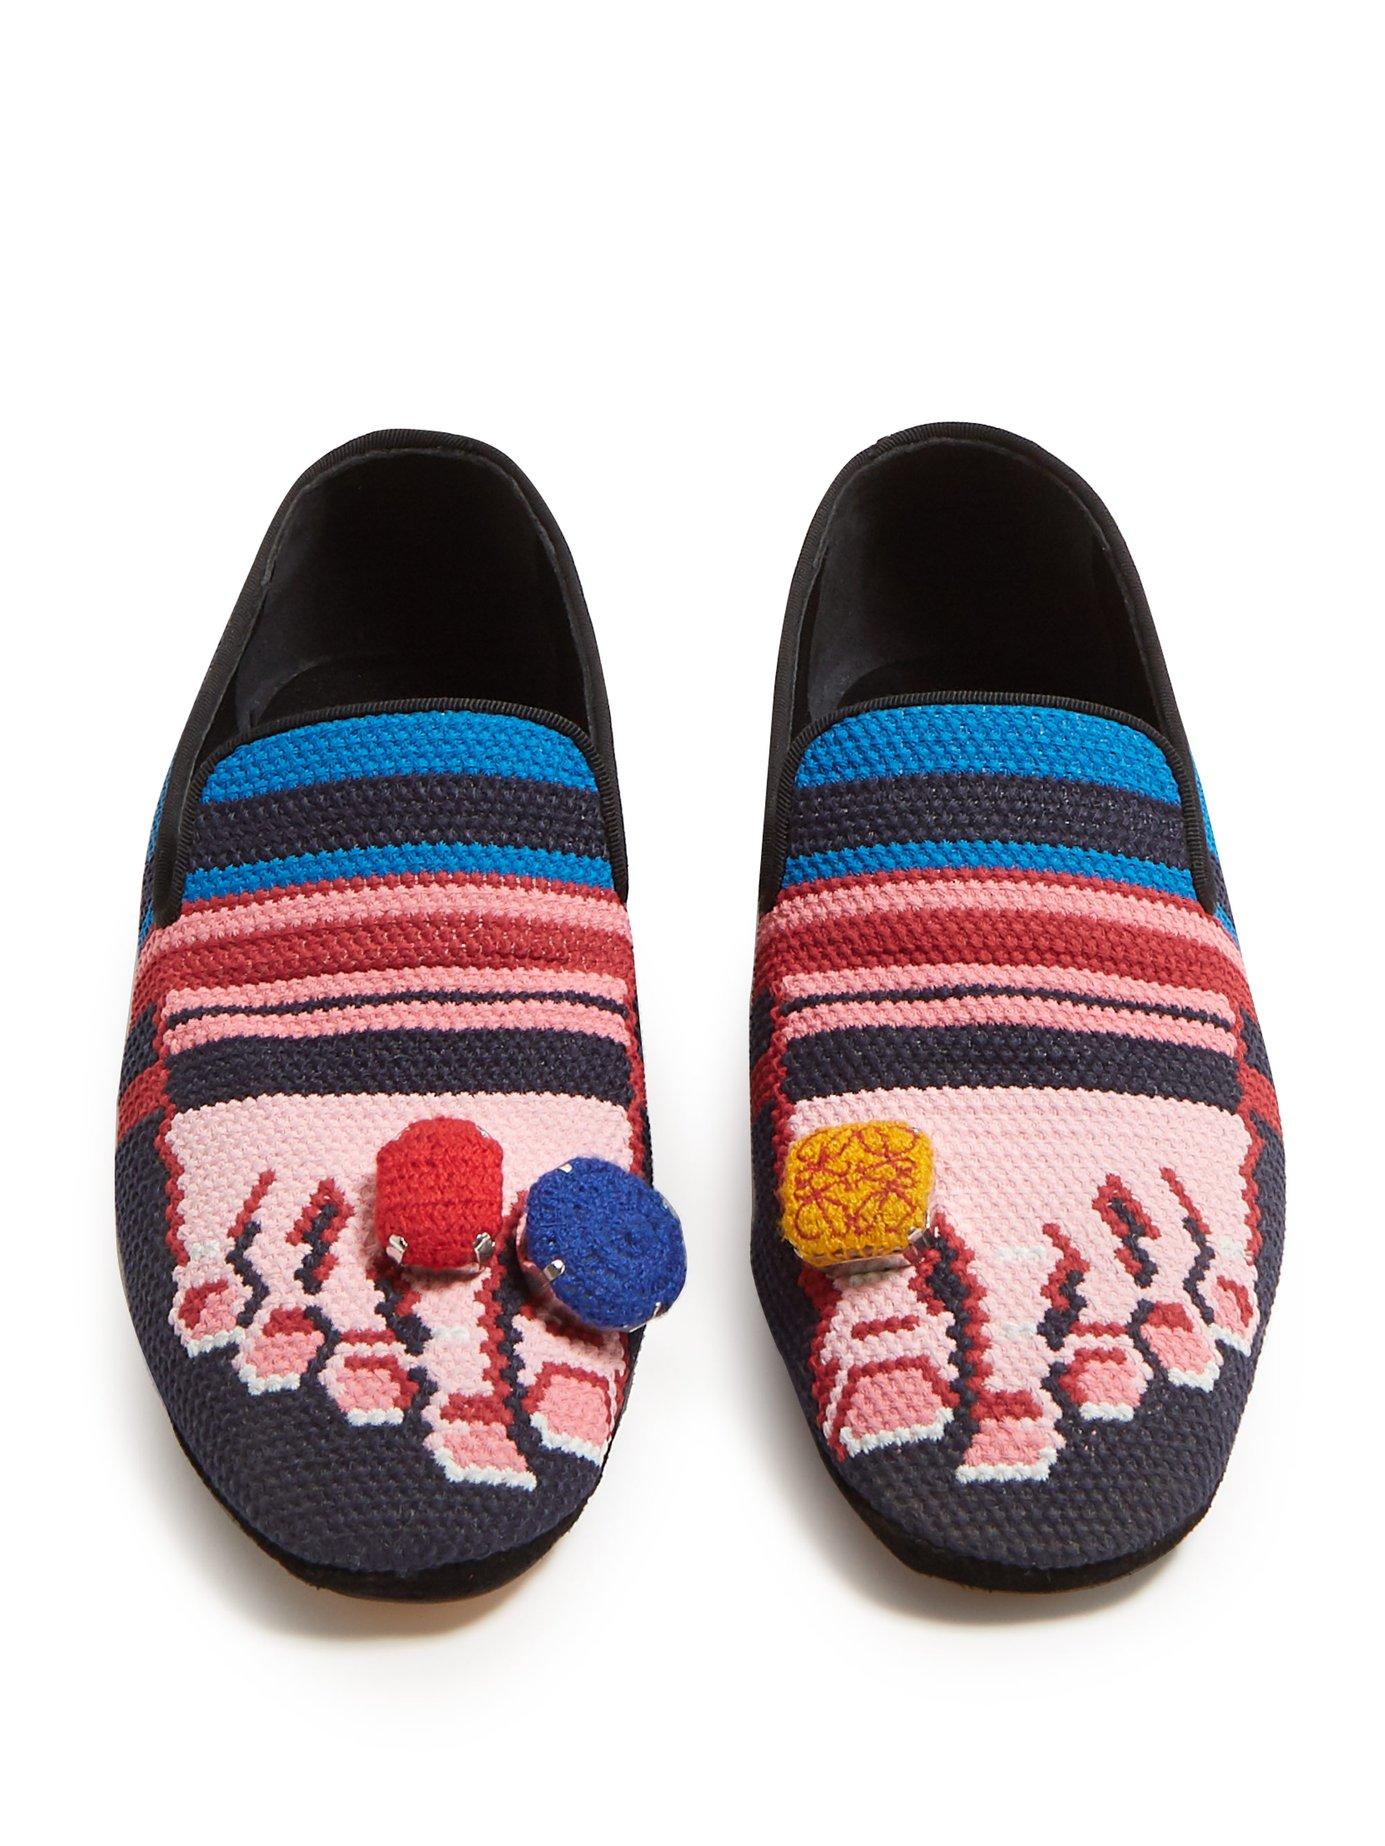 Loewe Embroidered Toe Slipper Navy/pink in Pink Navy (Blue) | Lyst